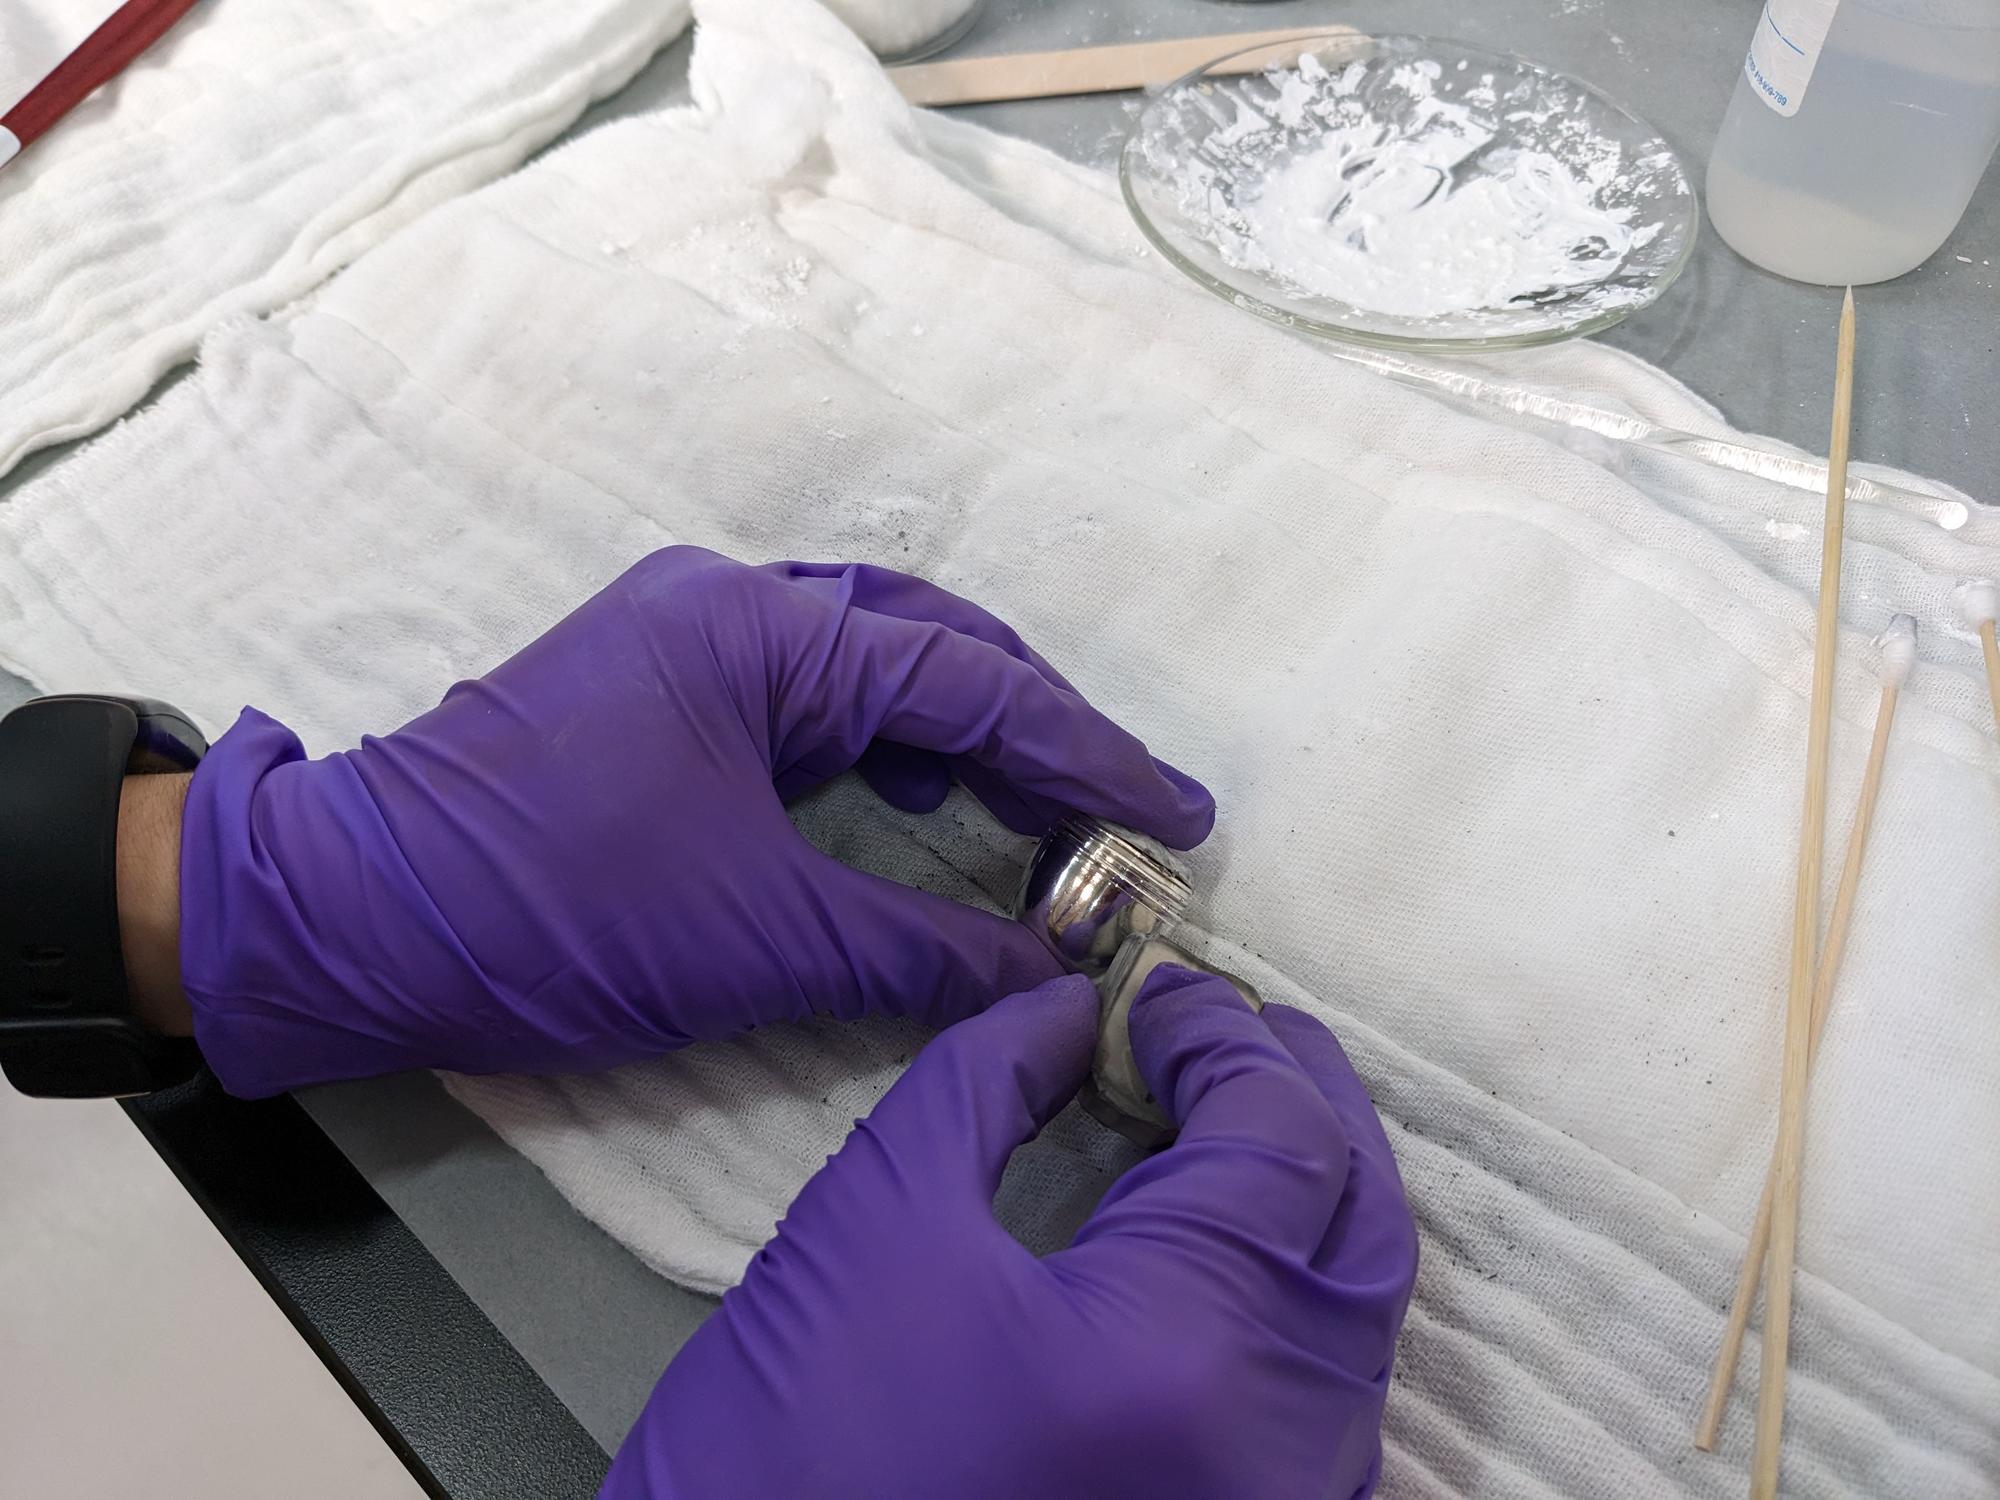 Image of a small silver object being cleaned by a staff member at the Isabella Stewart Gardner Museum while wearing nitrile gloves.